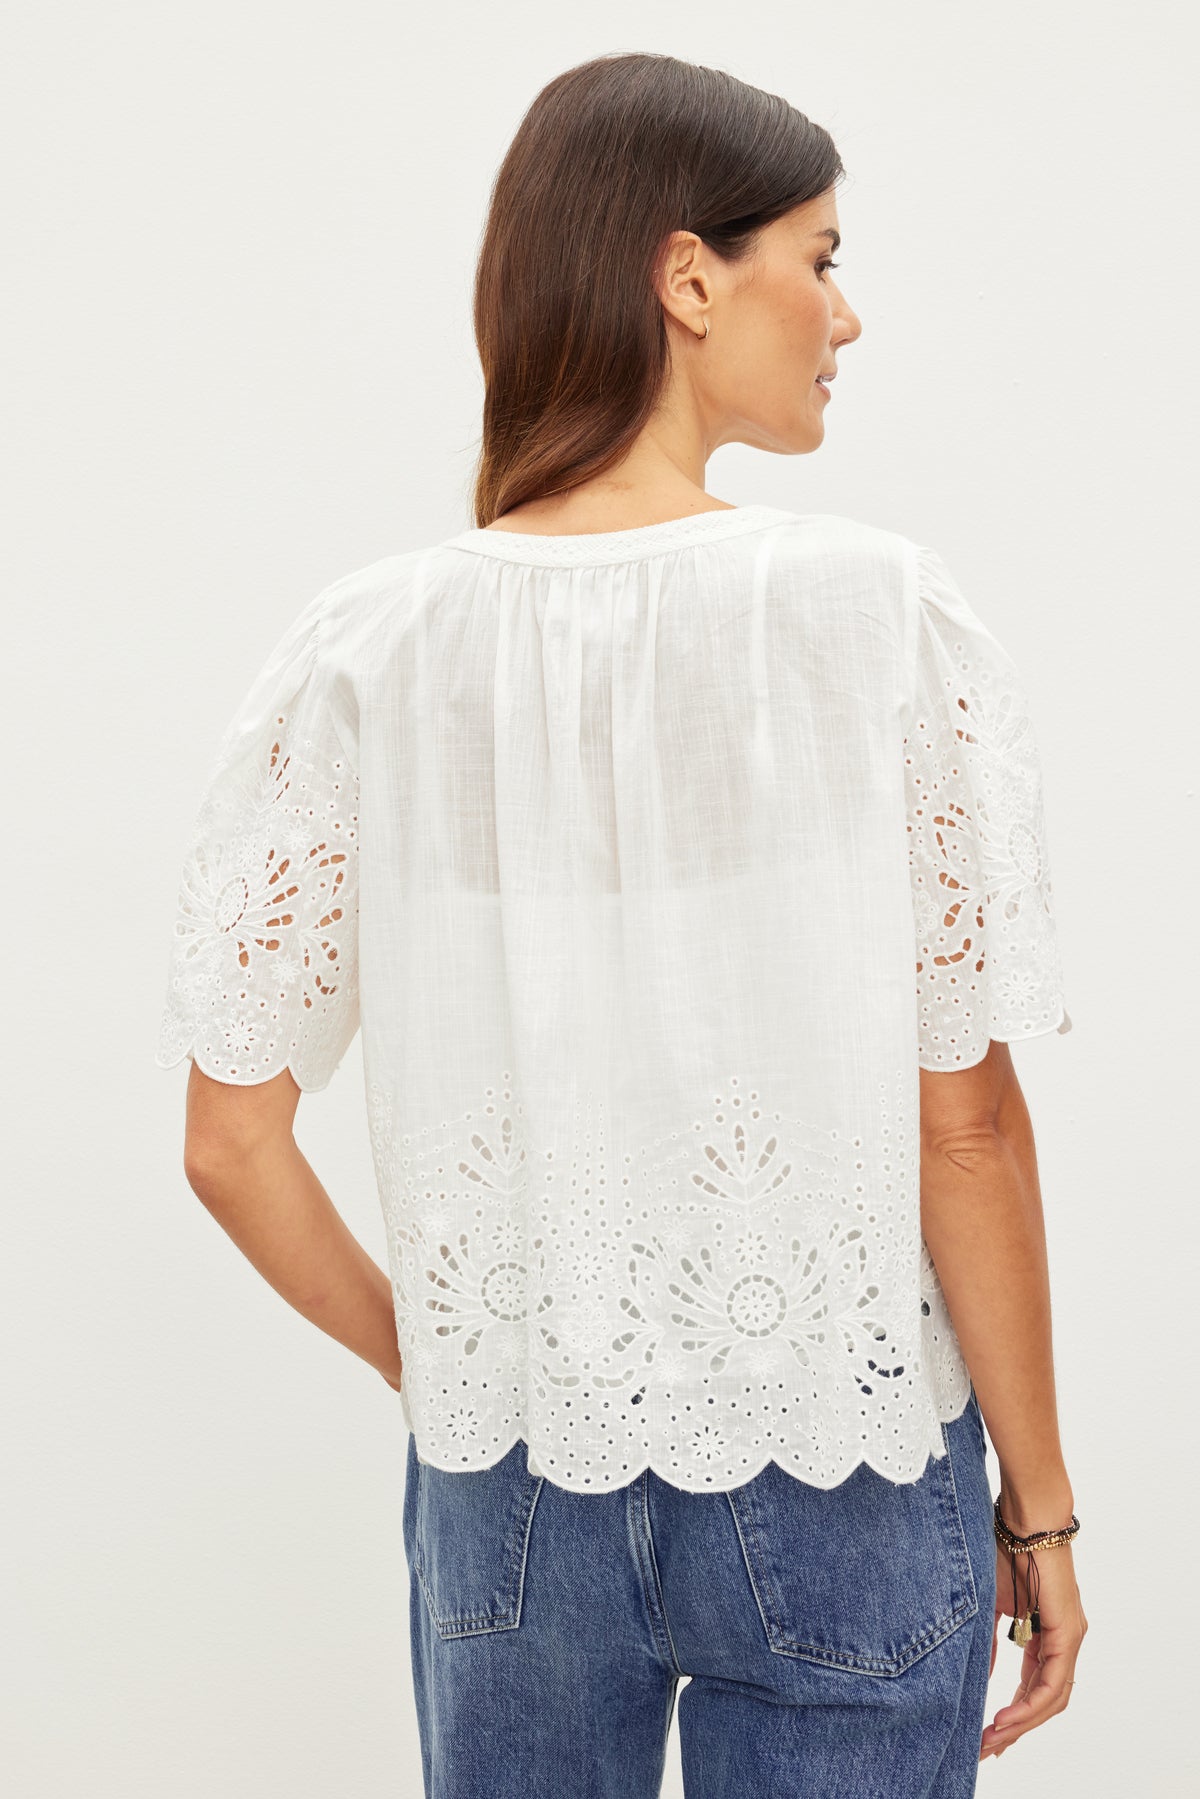 Velvet Embroidered Lace Top